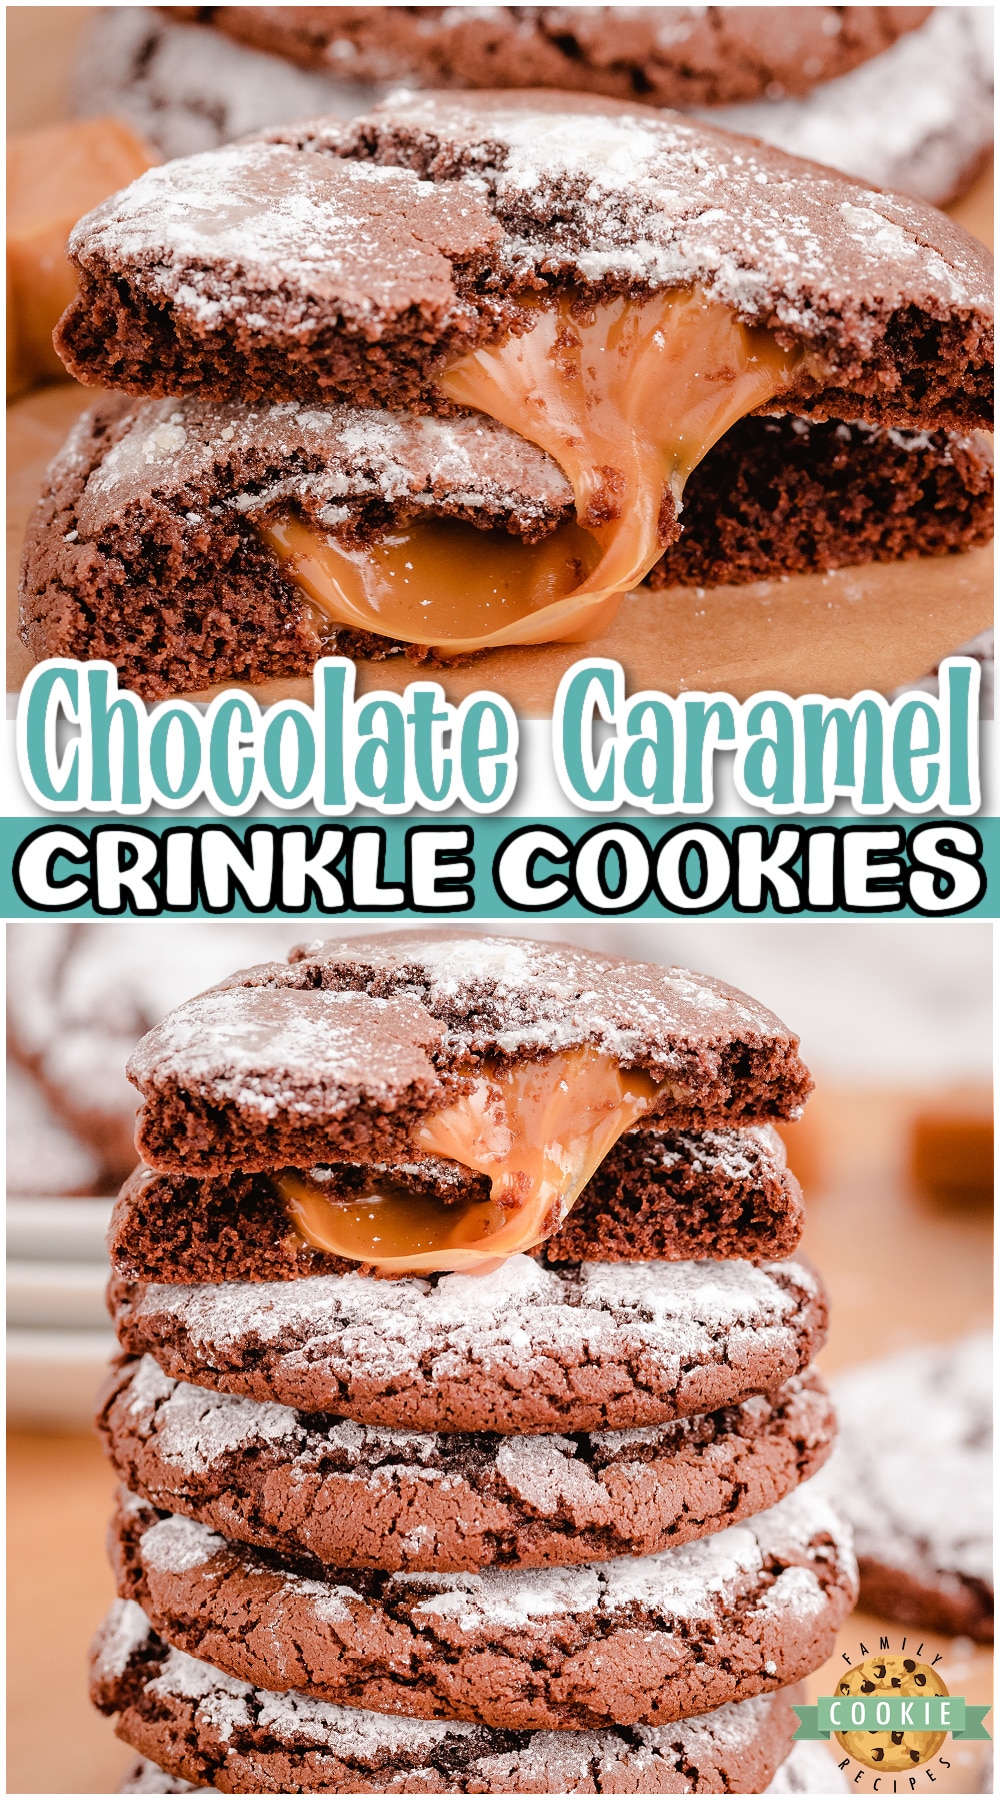 Caramel Chocolate Crinkle Cookies are a decadent combination of chewy caramel and soft chocolate cookies rolled in sweet powdered sugar. Fantastic twist on classic crinkle cookies that everyone loves!